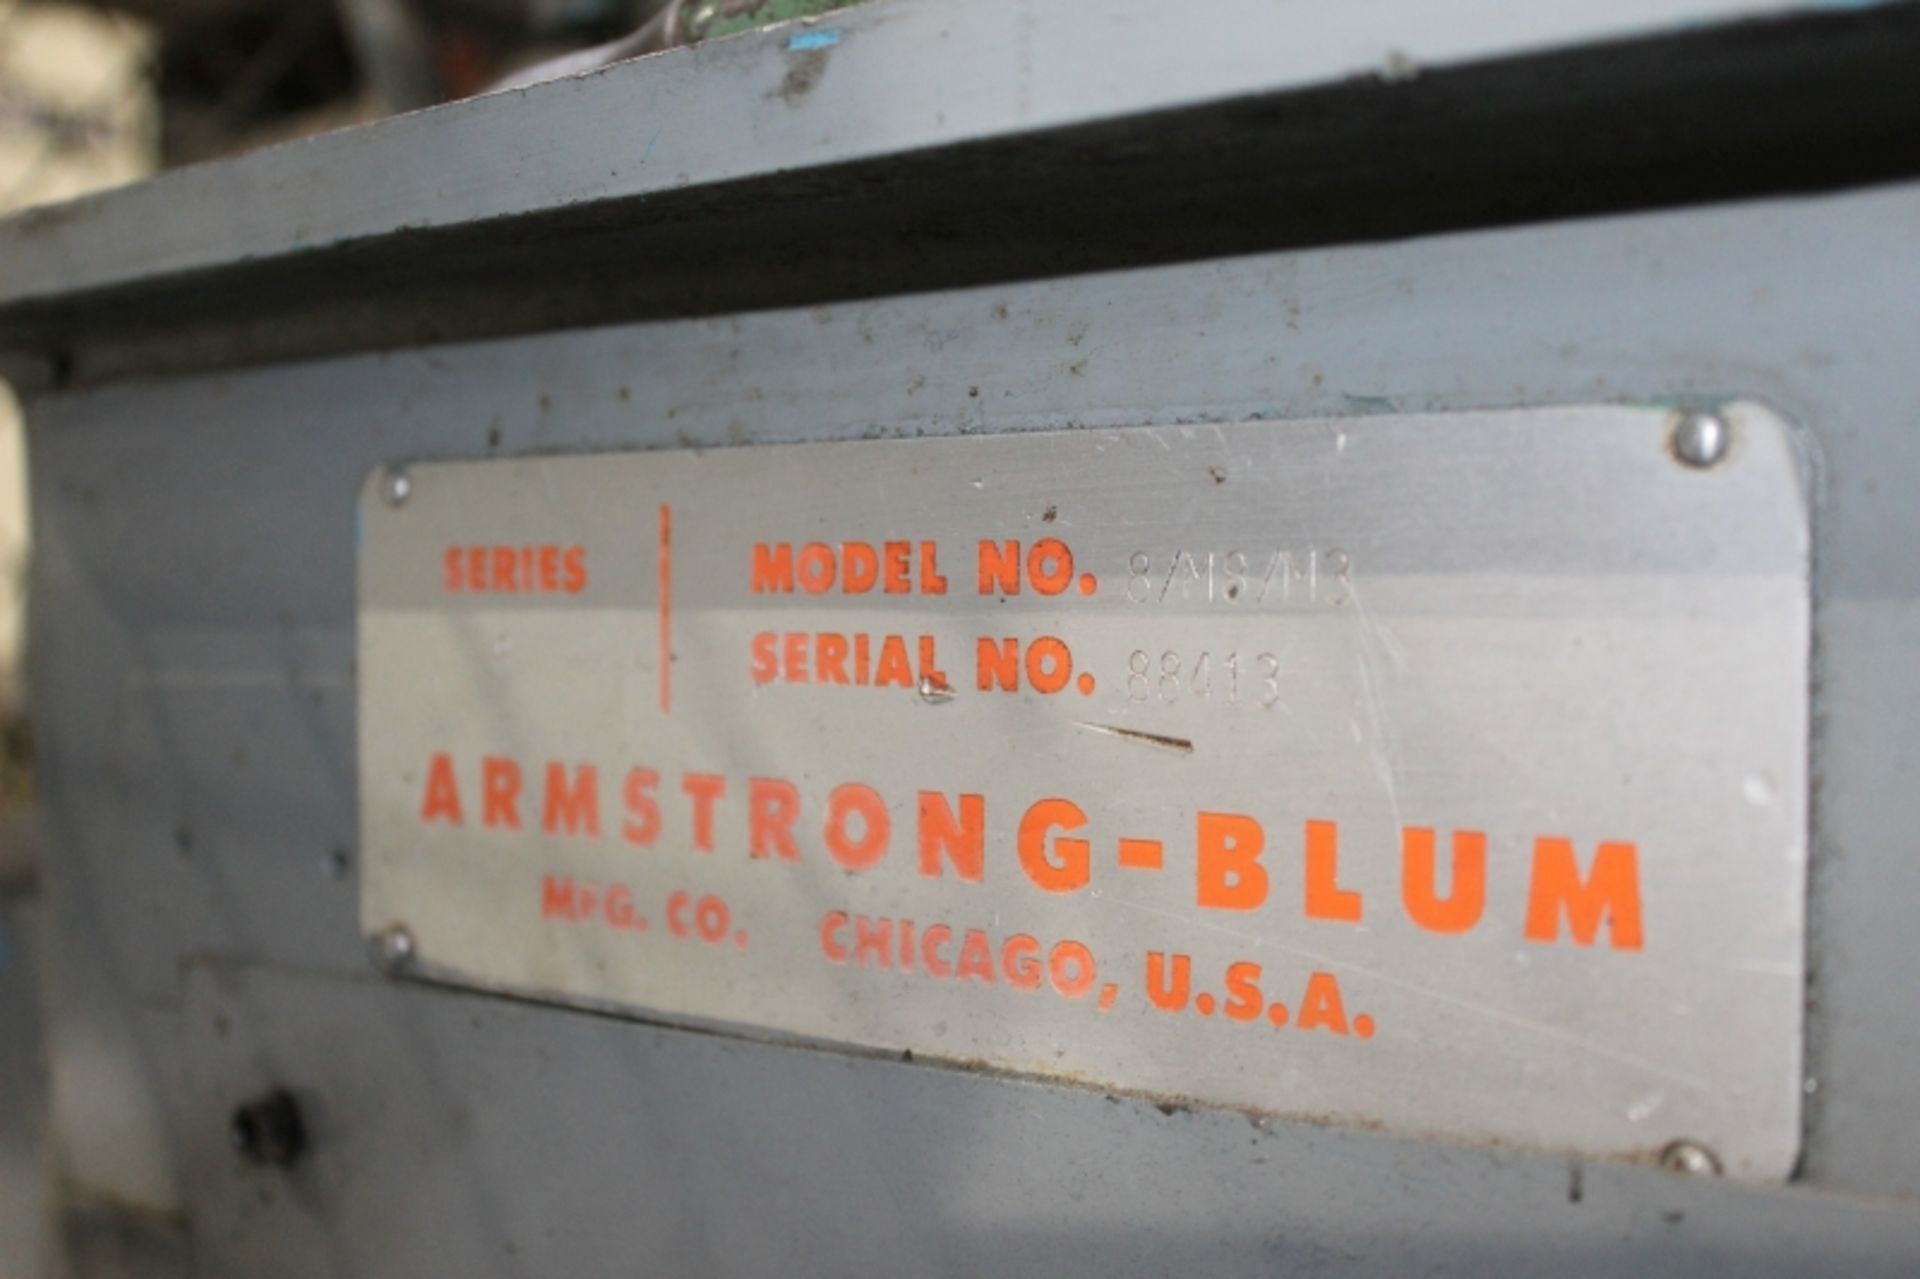 Armstrong-Blum Marvel Mark 8 Vertical Band Saw, S/N 88413 - Image 4 of 4